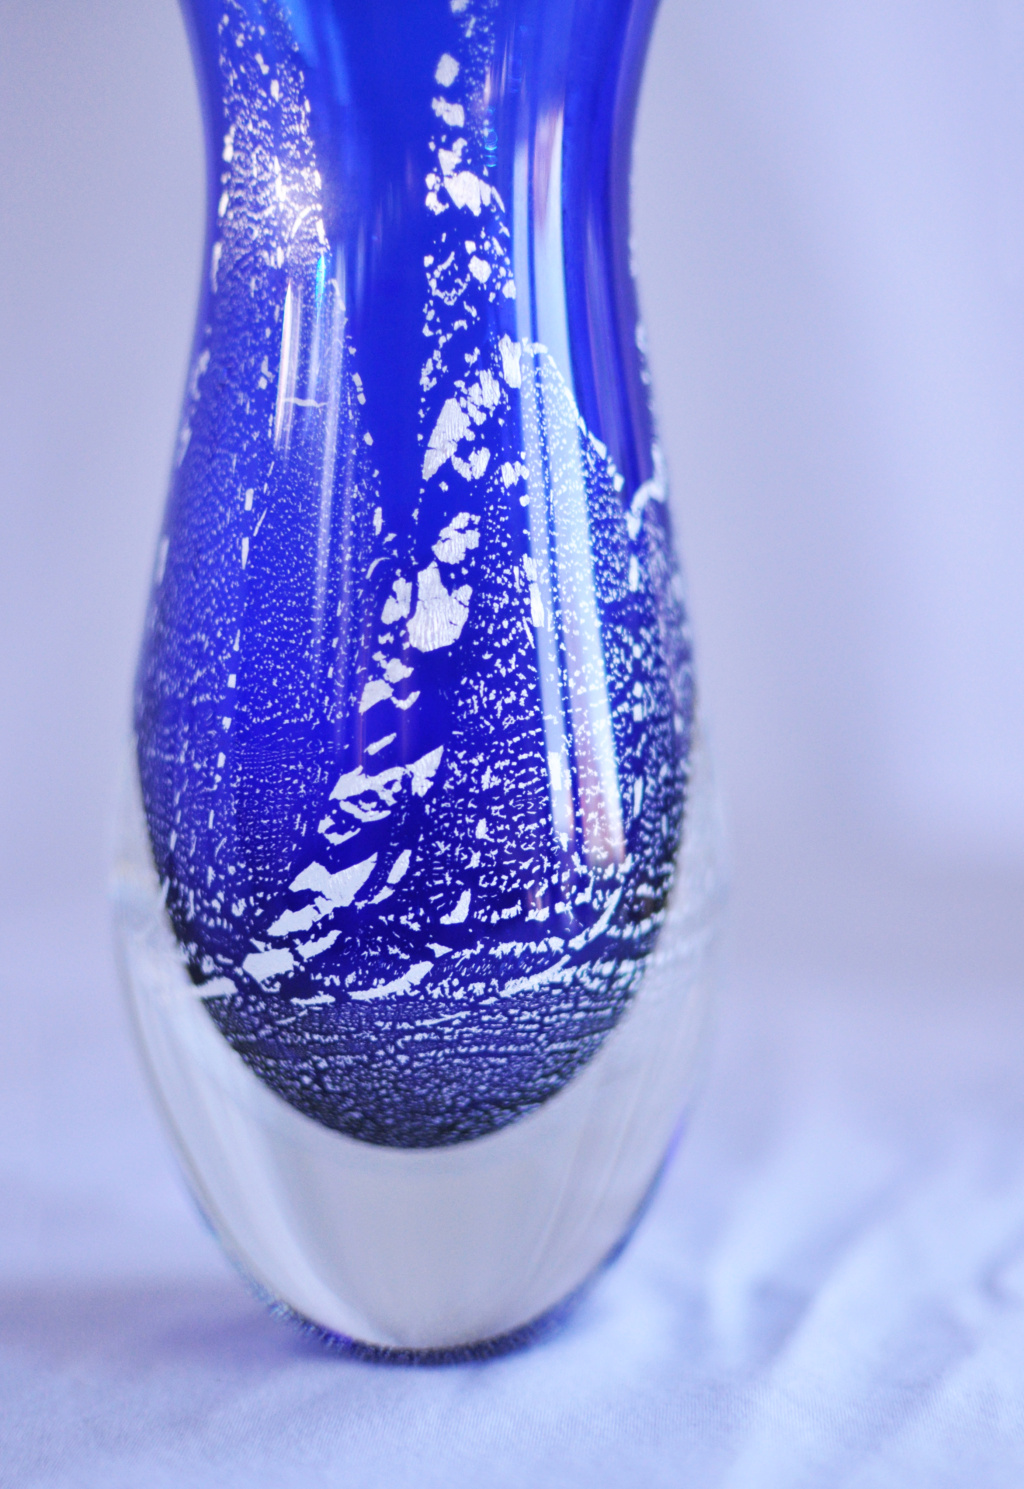 Advice on Cobalt Blue Glass Vase Please... is this Murano?? Base_r11